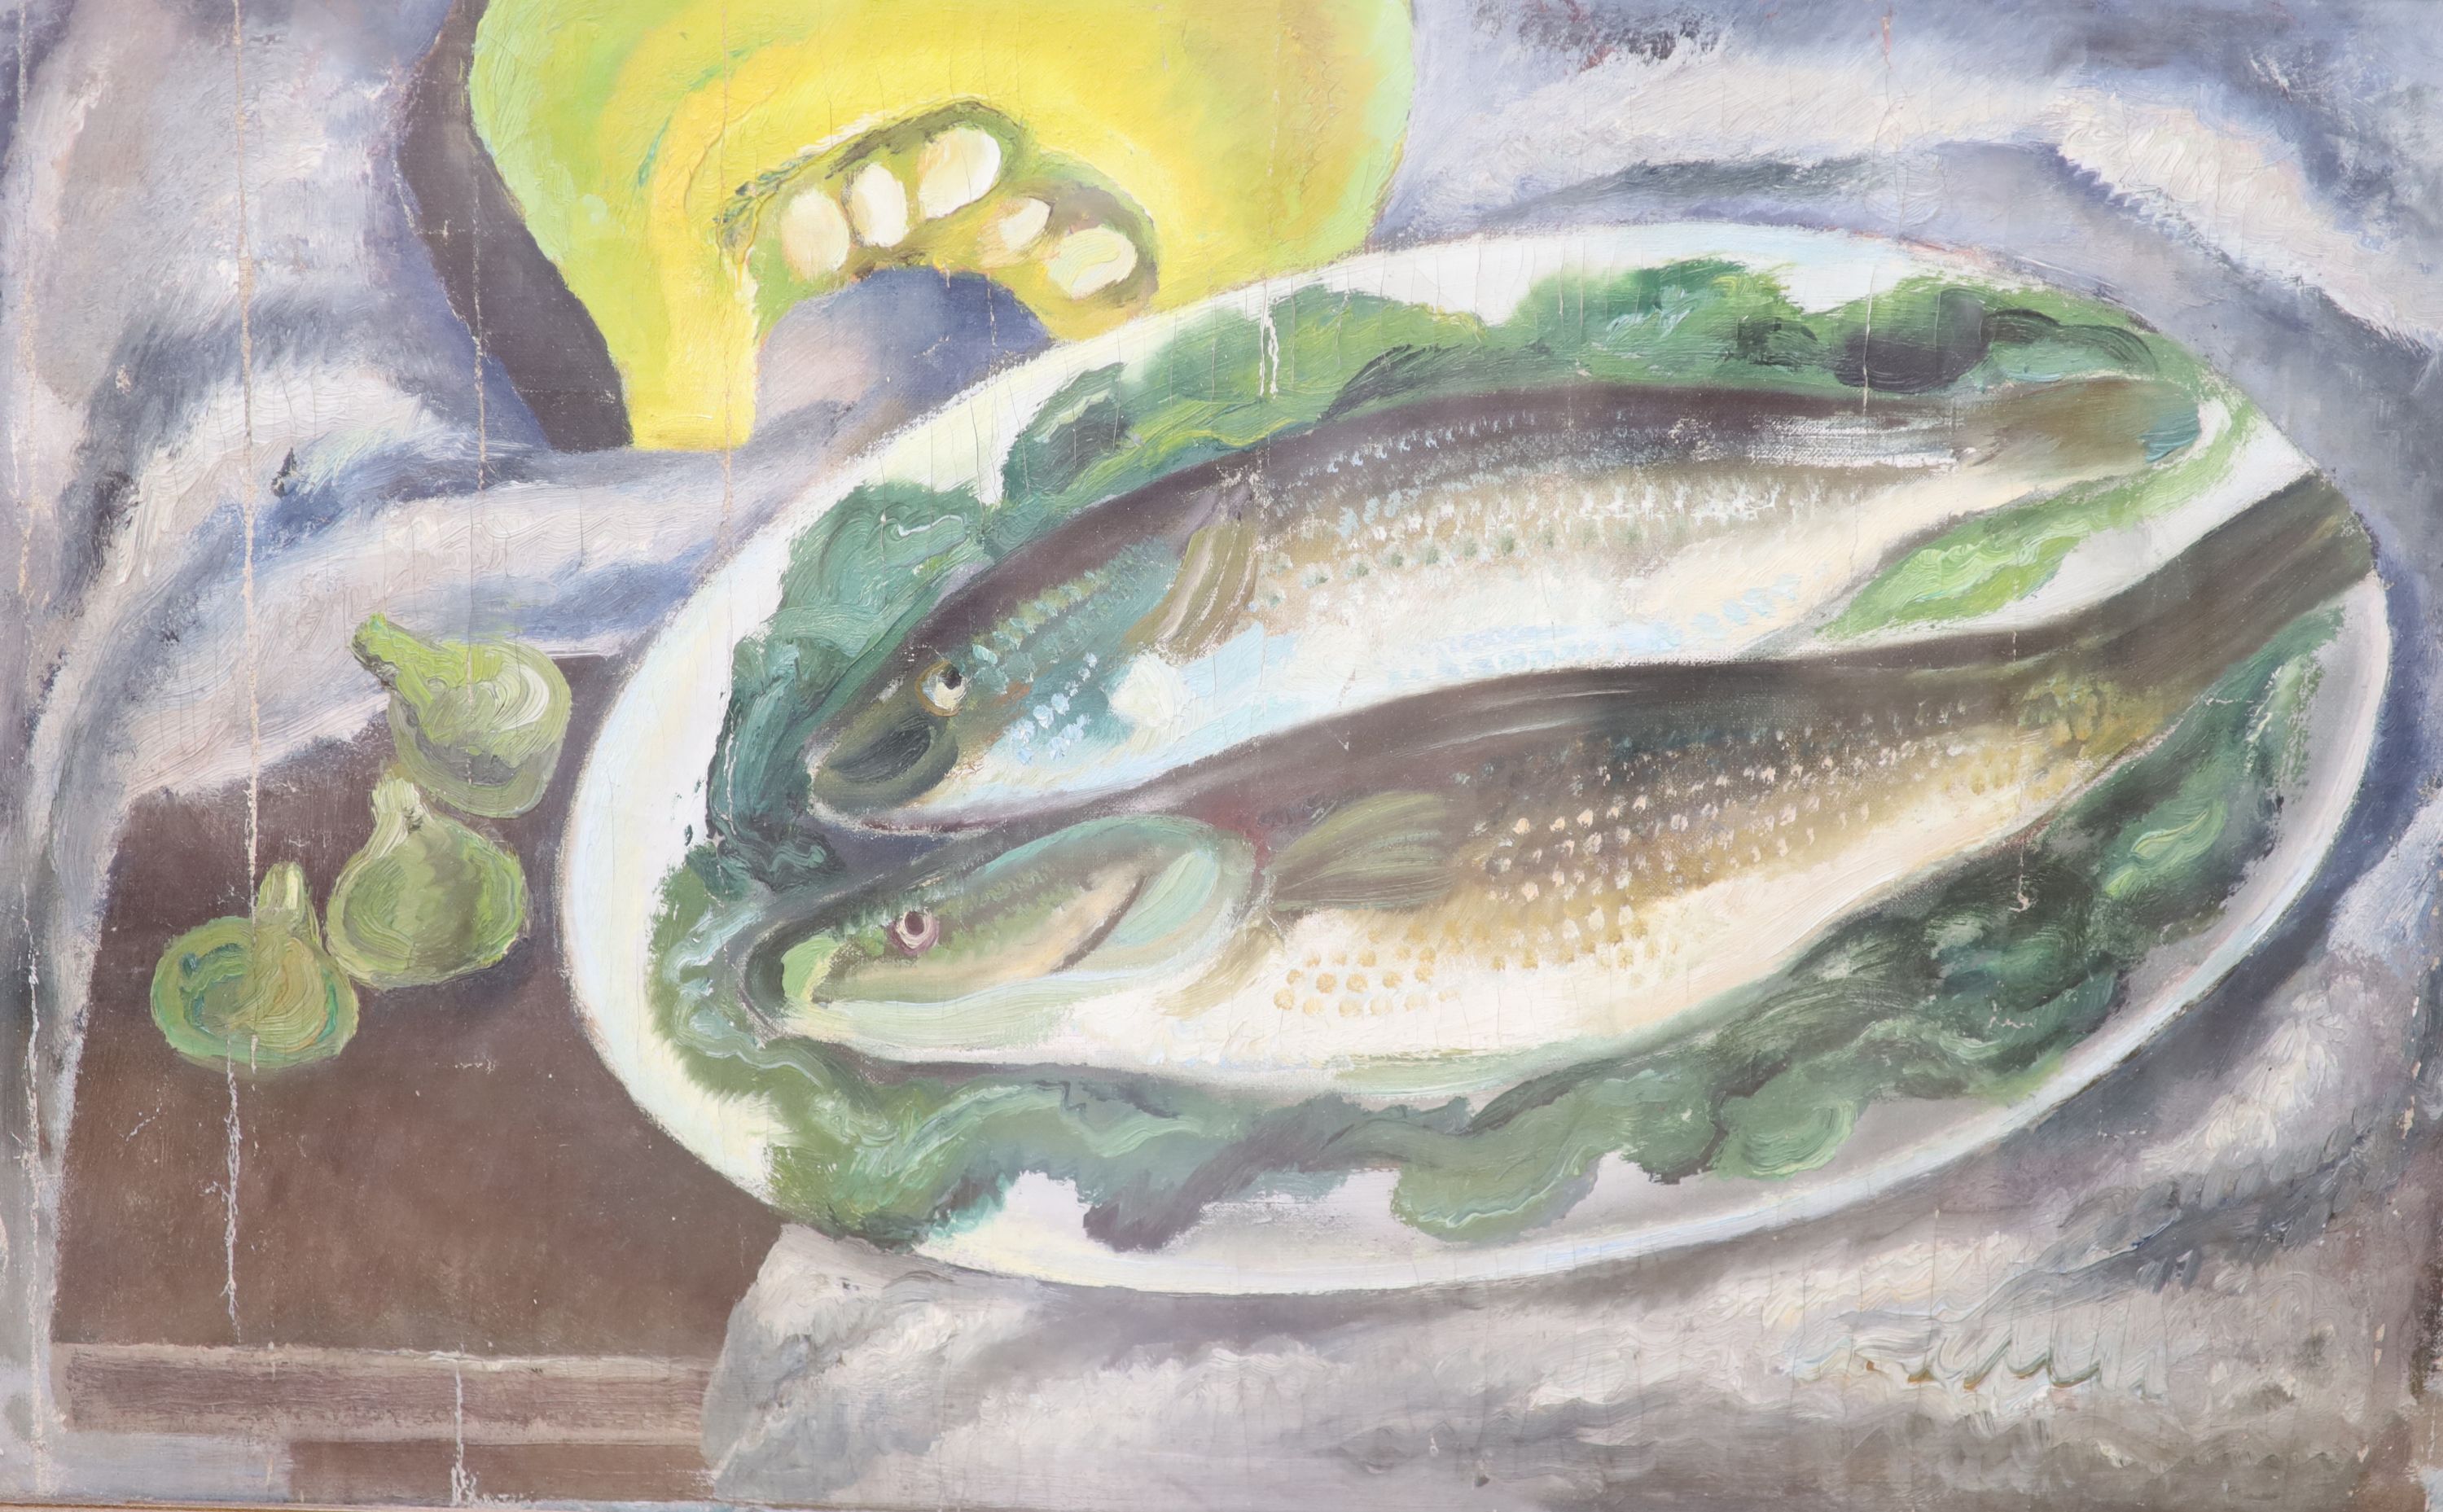 Early 20th century Continental School, still life with fish, oil on canvas (backed), framed and glazed, 37 x 59 cm